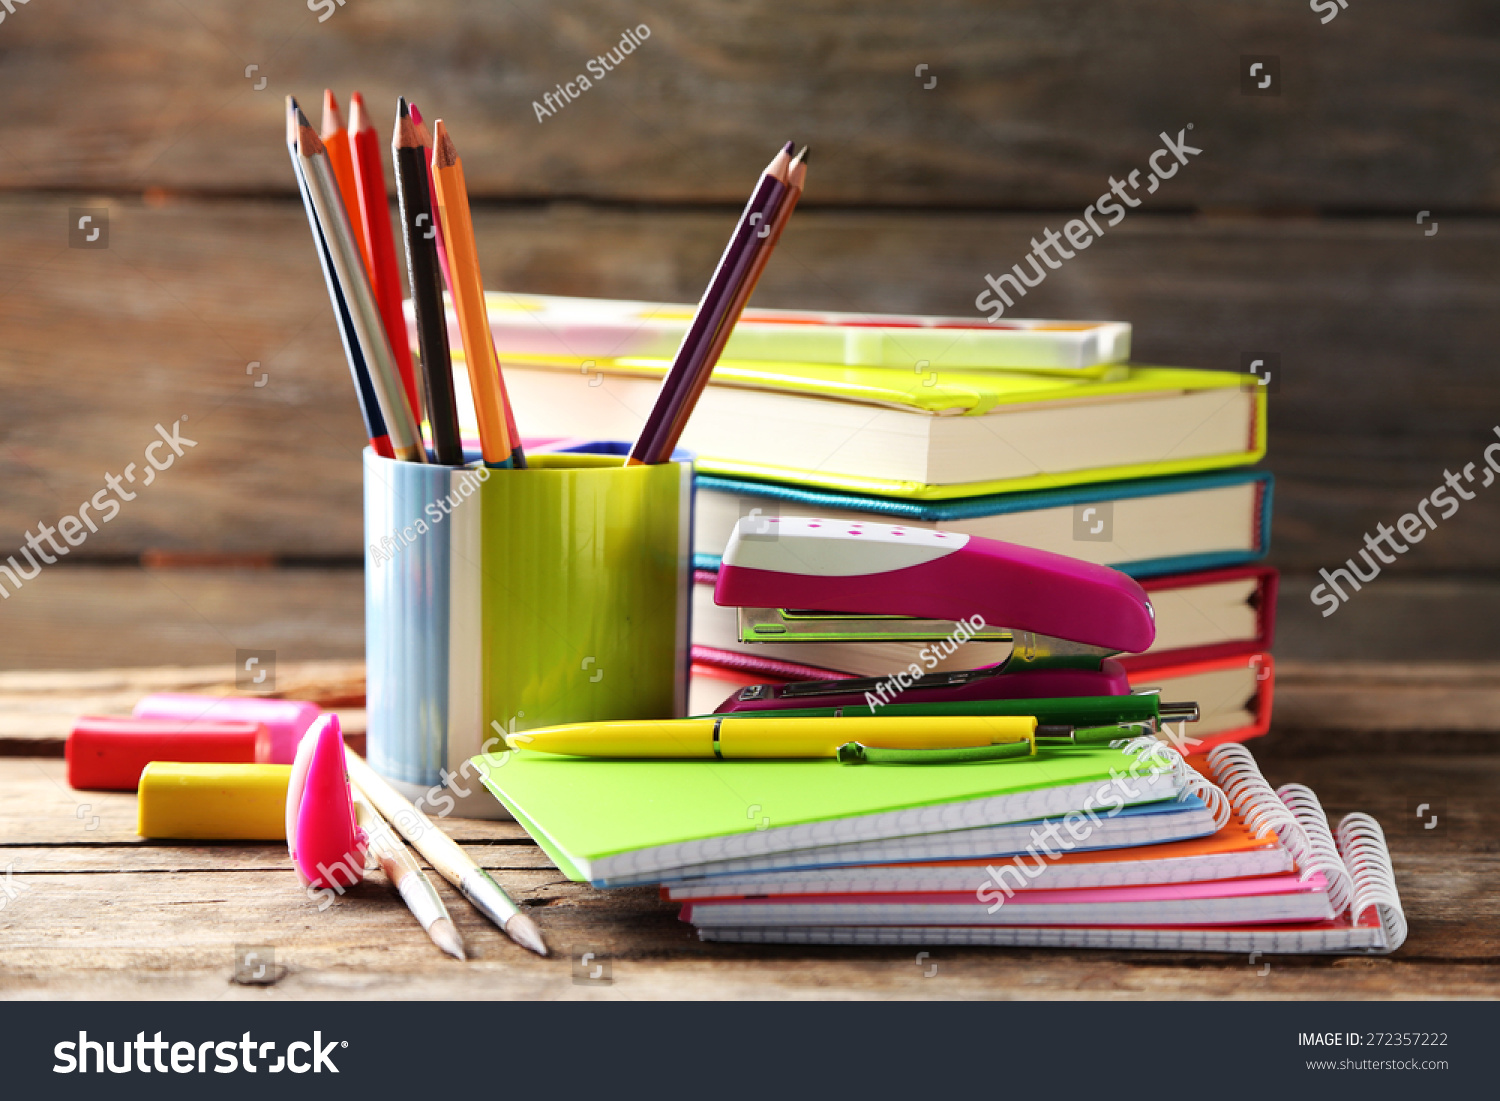 Bright school stationery on old wooden table #272357222